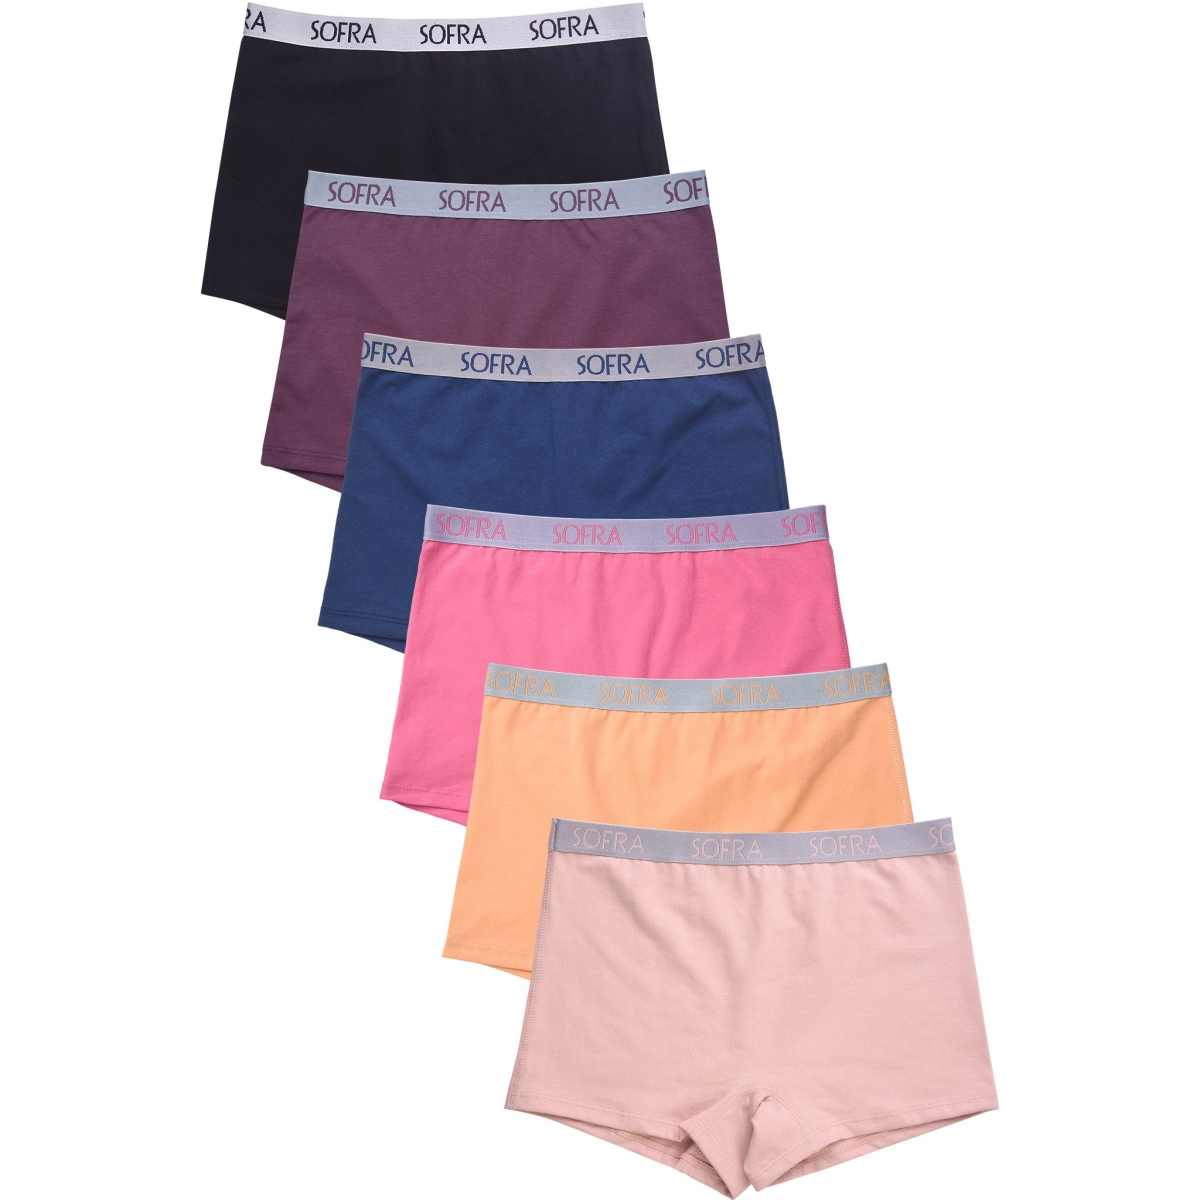 Picture of 247 Frenzy 247-LP1422CB4-SM Sofra Womens Essentials Cotton Stretch Boyshort Panty Underwear - Assorted Color - Small - Pack of 6